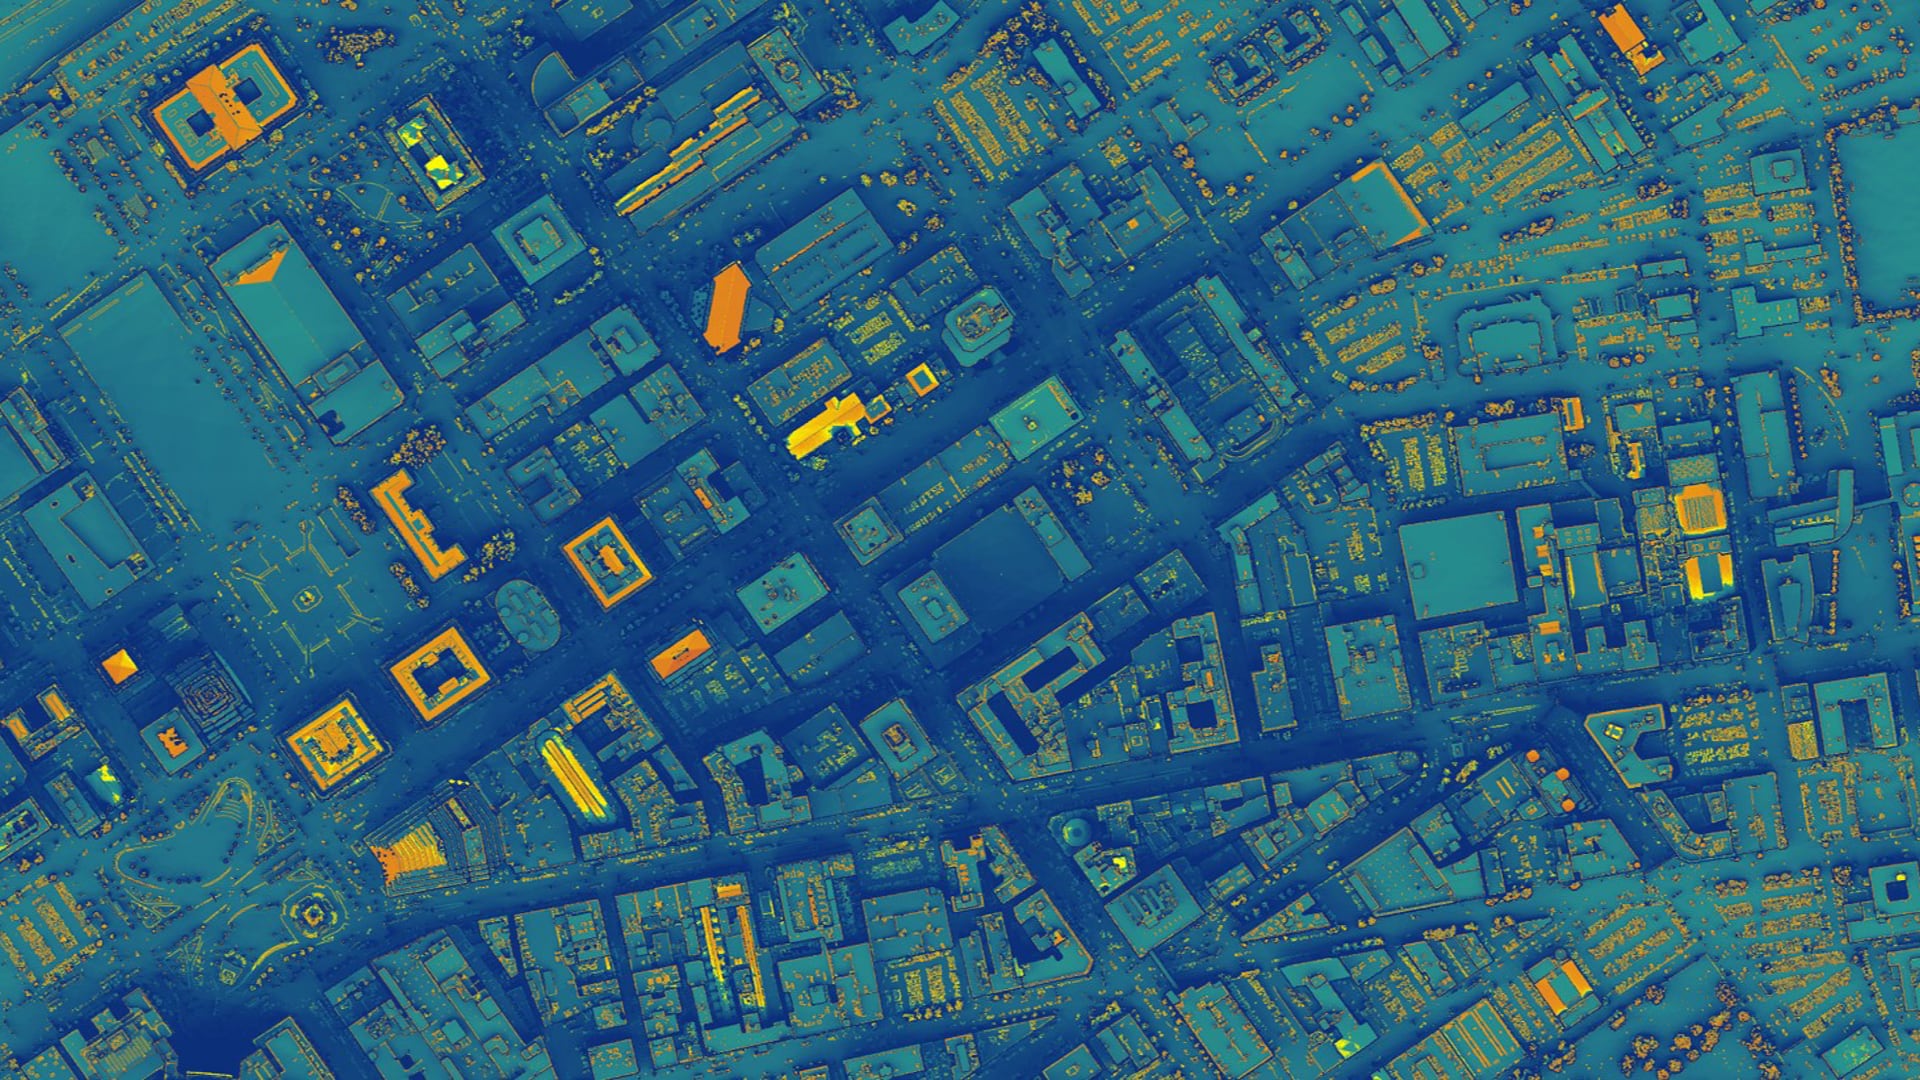 Annual solar energy generation potential calculated using NASA POWER (preprocessed CERES and MODIS data from the Aqua and Terra satellites) in downtown Cleveland, OH. Solar irradiation data are averaged over 22 years (1983 to 2005). LiDAR data were used to model shadowing and the number of sunlight exposure hours per year. Warm colors indicate high solar energy generation potential per square foot. Unshaded rooftops with slopes and aspects that correspond with local solar geometry are optimal for installing solar panels.